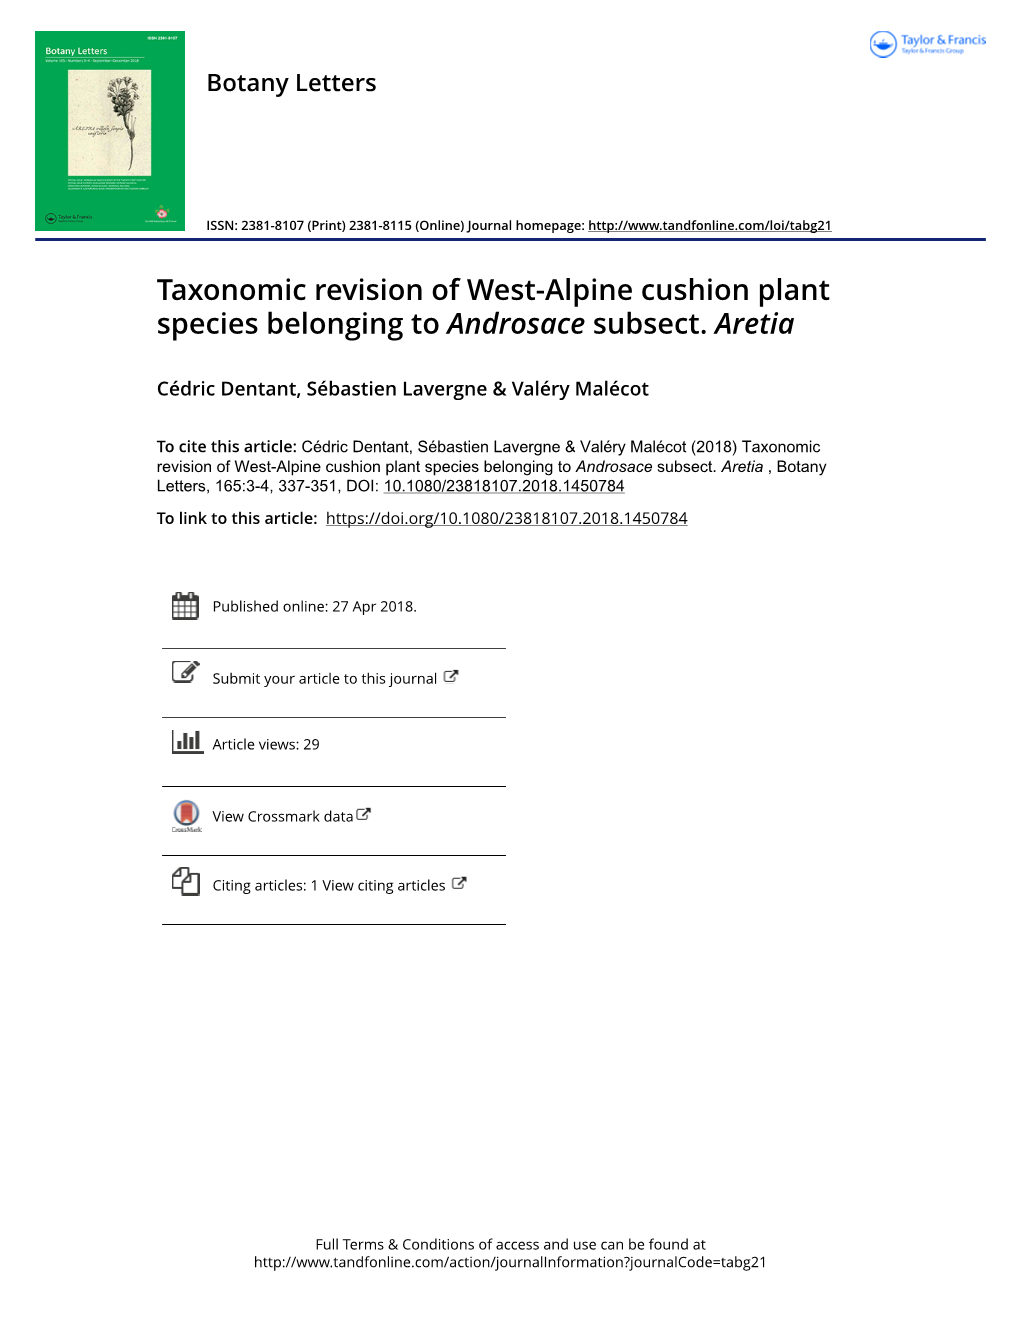 Taxonomic Revision of West-Alpine Cushion Plant Species Belonging to Androsace Subsect